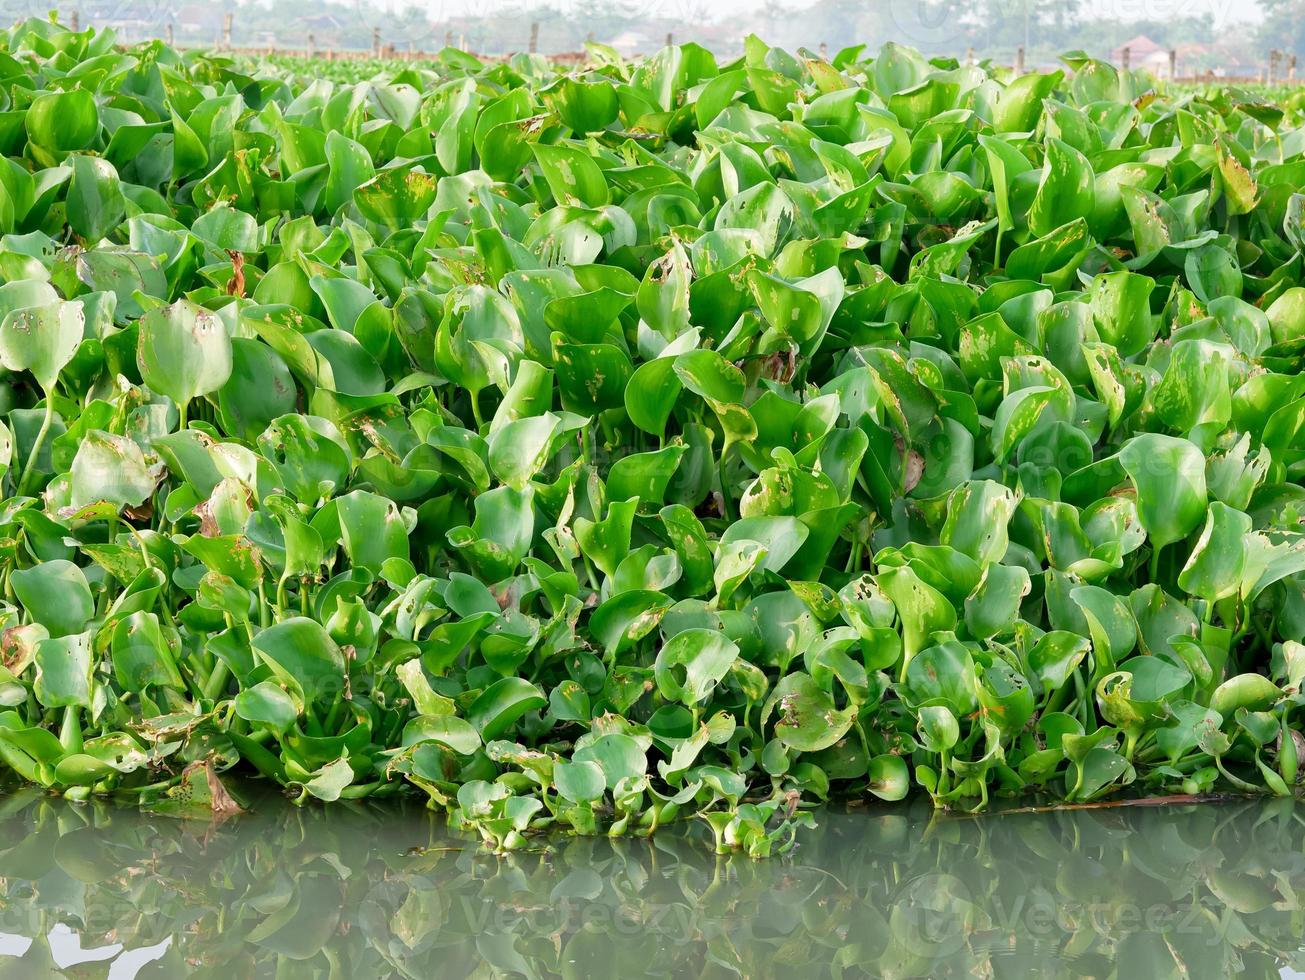 Common water hyacinth or Eichhornia crassipes photo